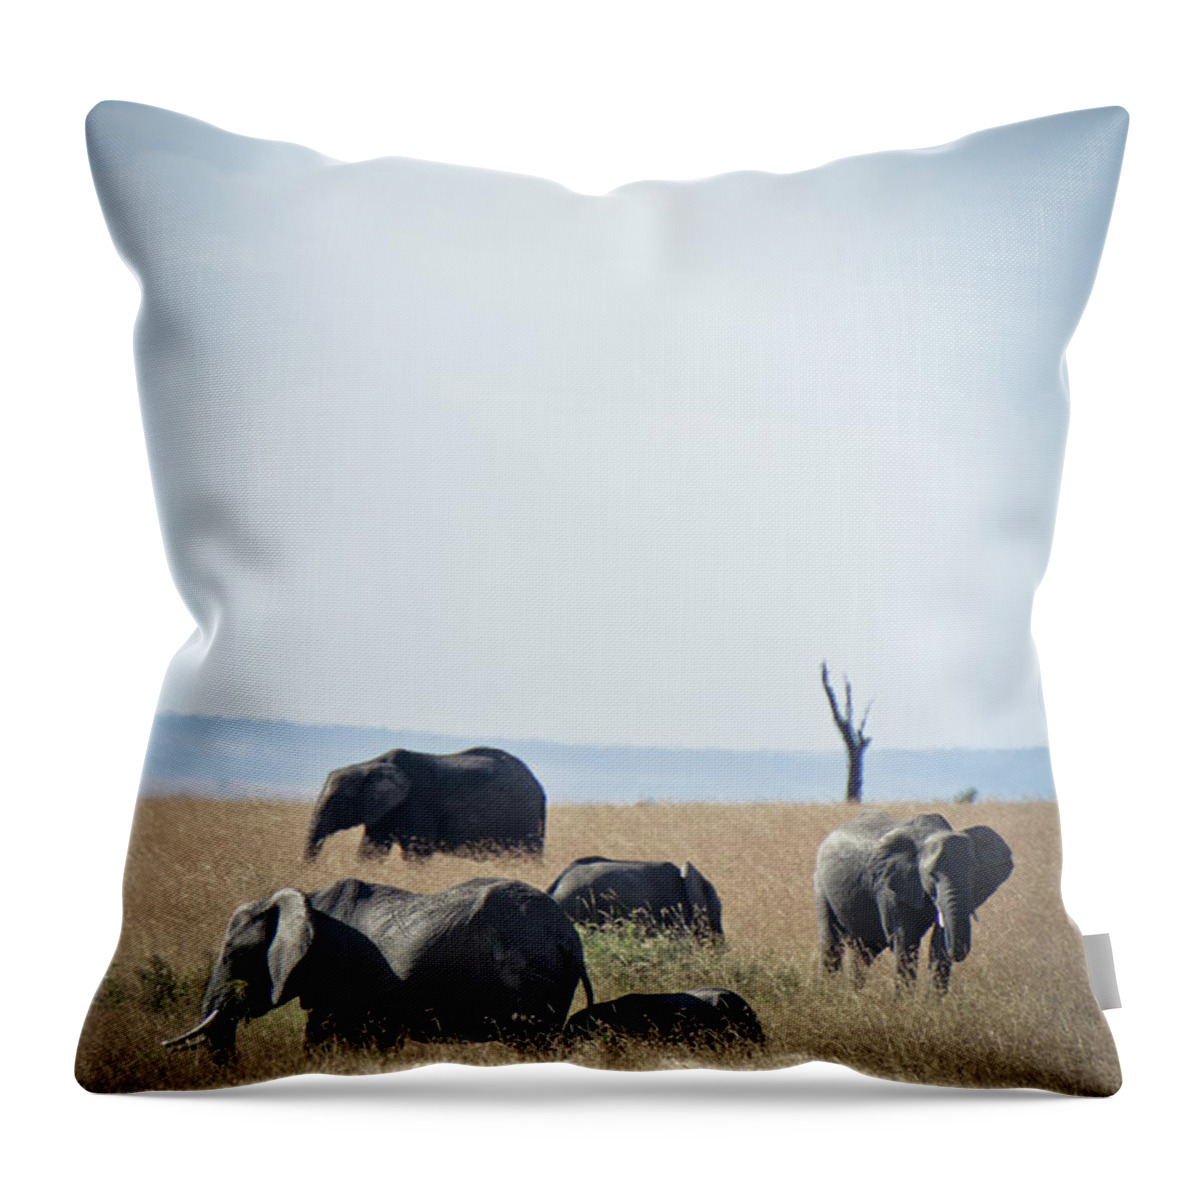 Kenya Throw Pillow featuring the photograph African Elephant by Meshaphoto